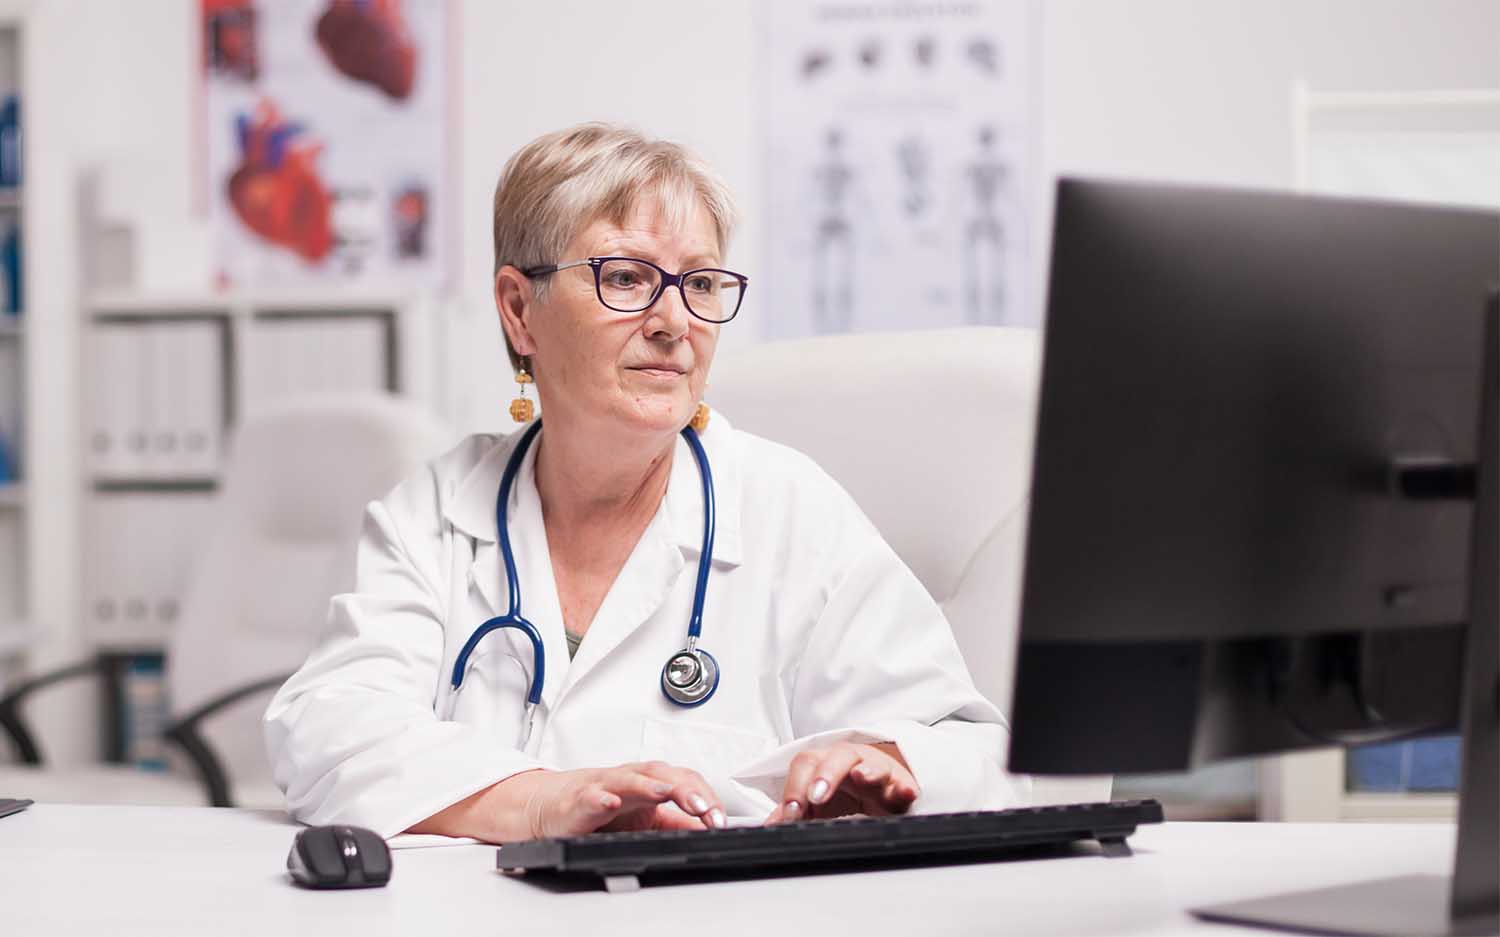 female doctor reviewing unrated medical malpractice insurance carrier on desktop